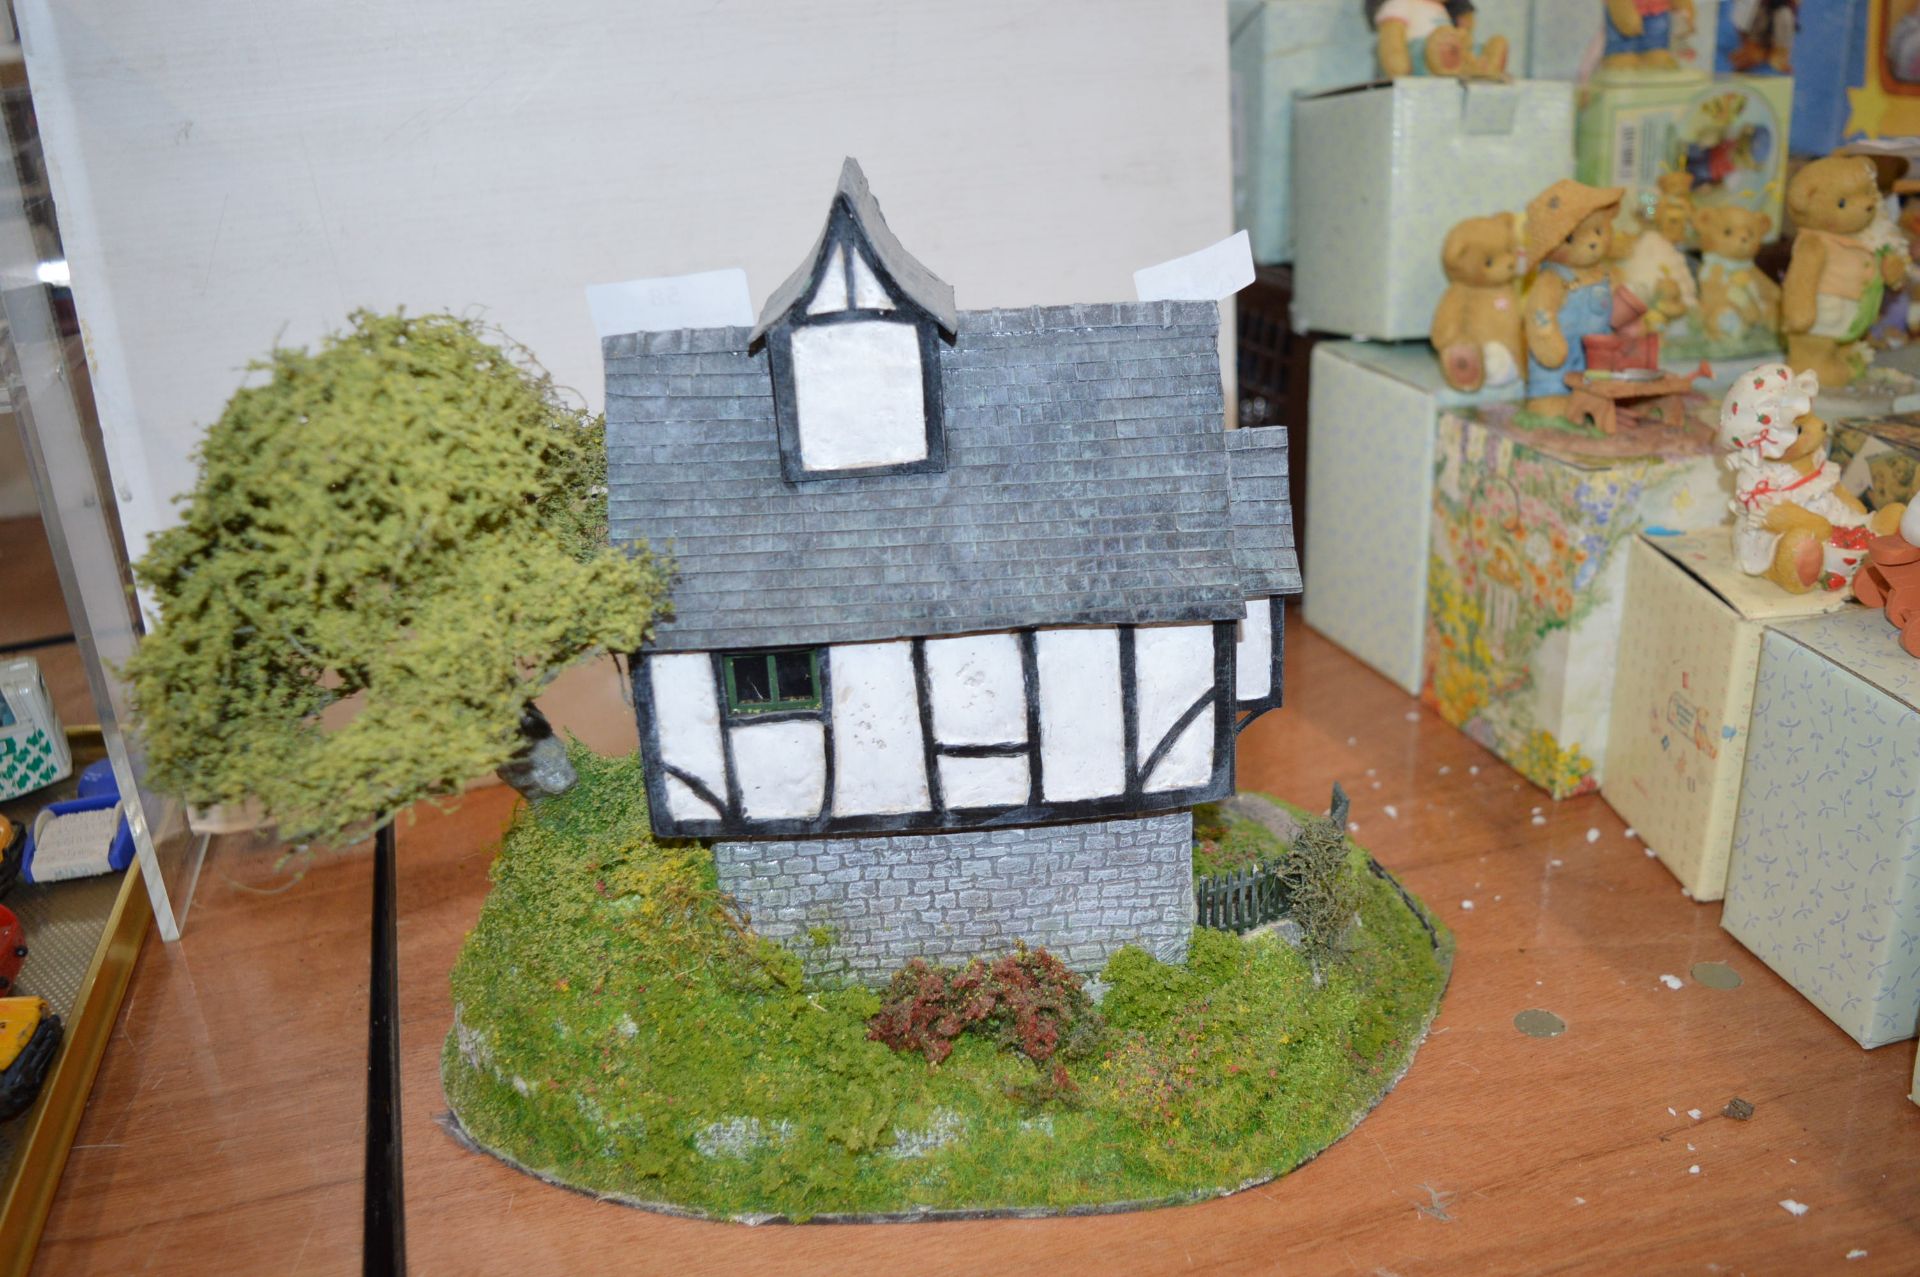 Scratch Built Model Watermill - Image 3 of 3